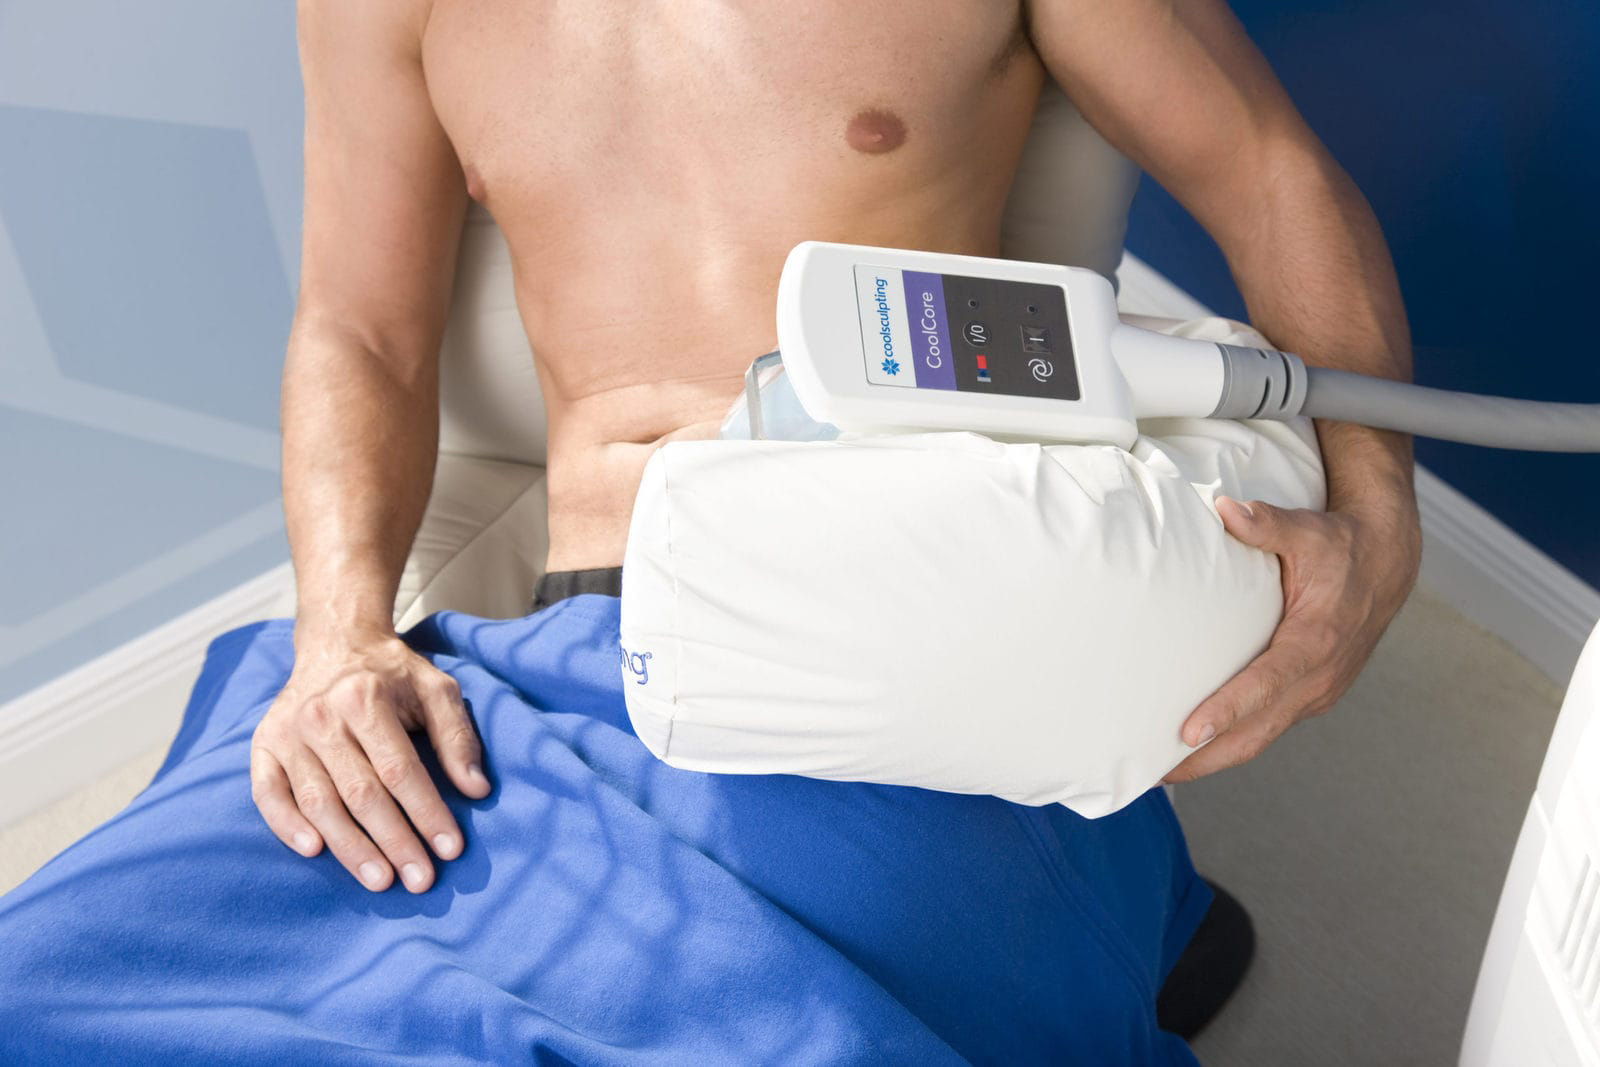 Male CoolSculpting patient undergoing treatment